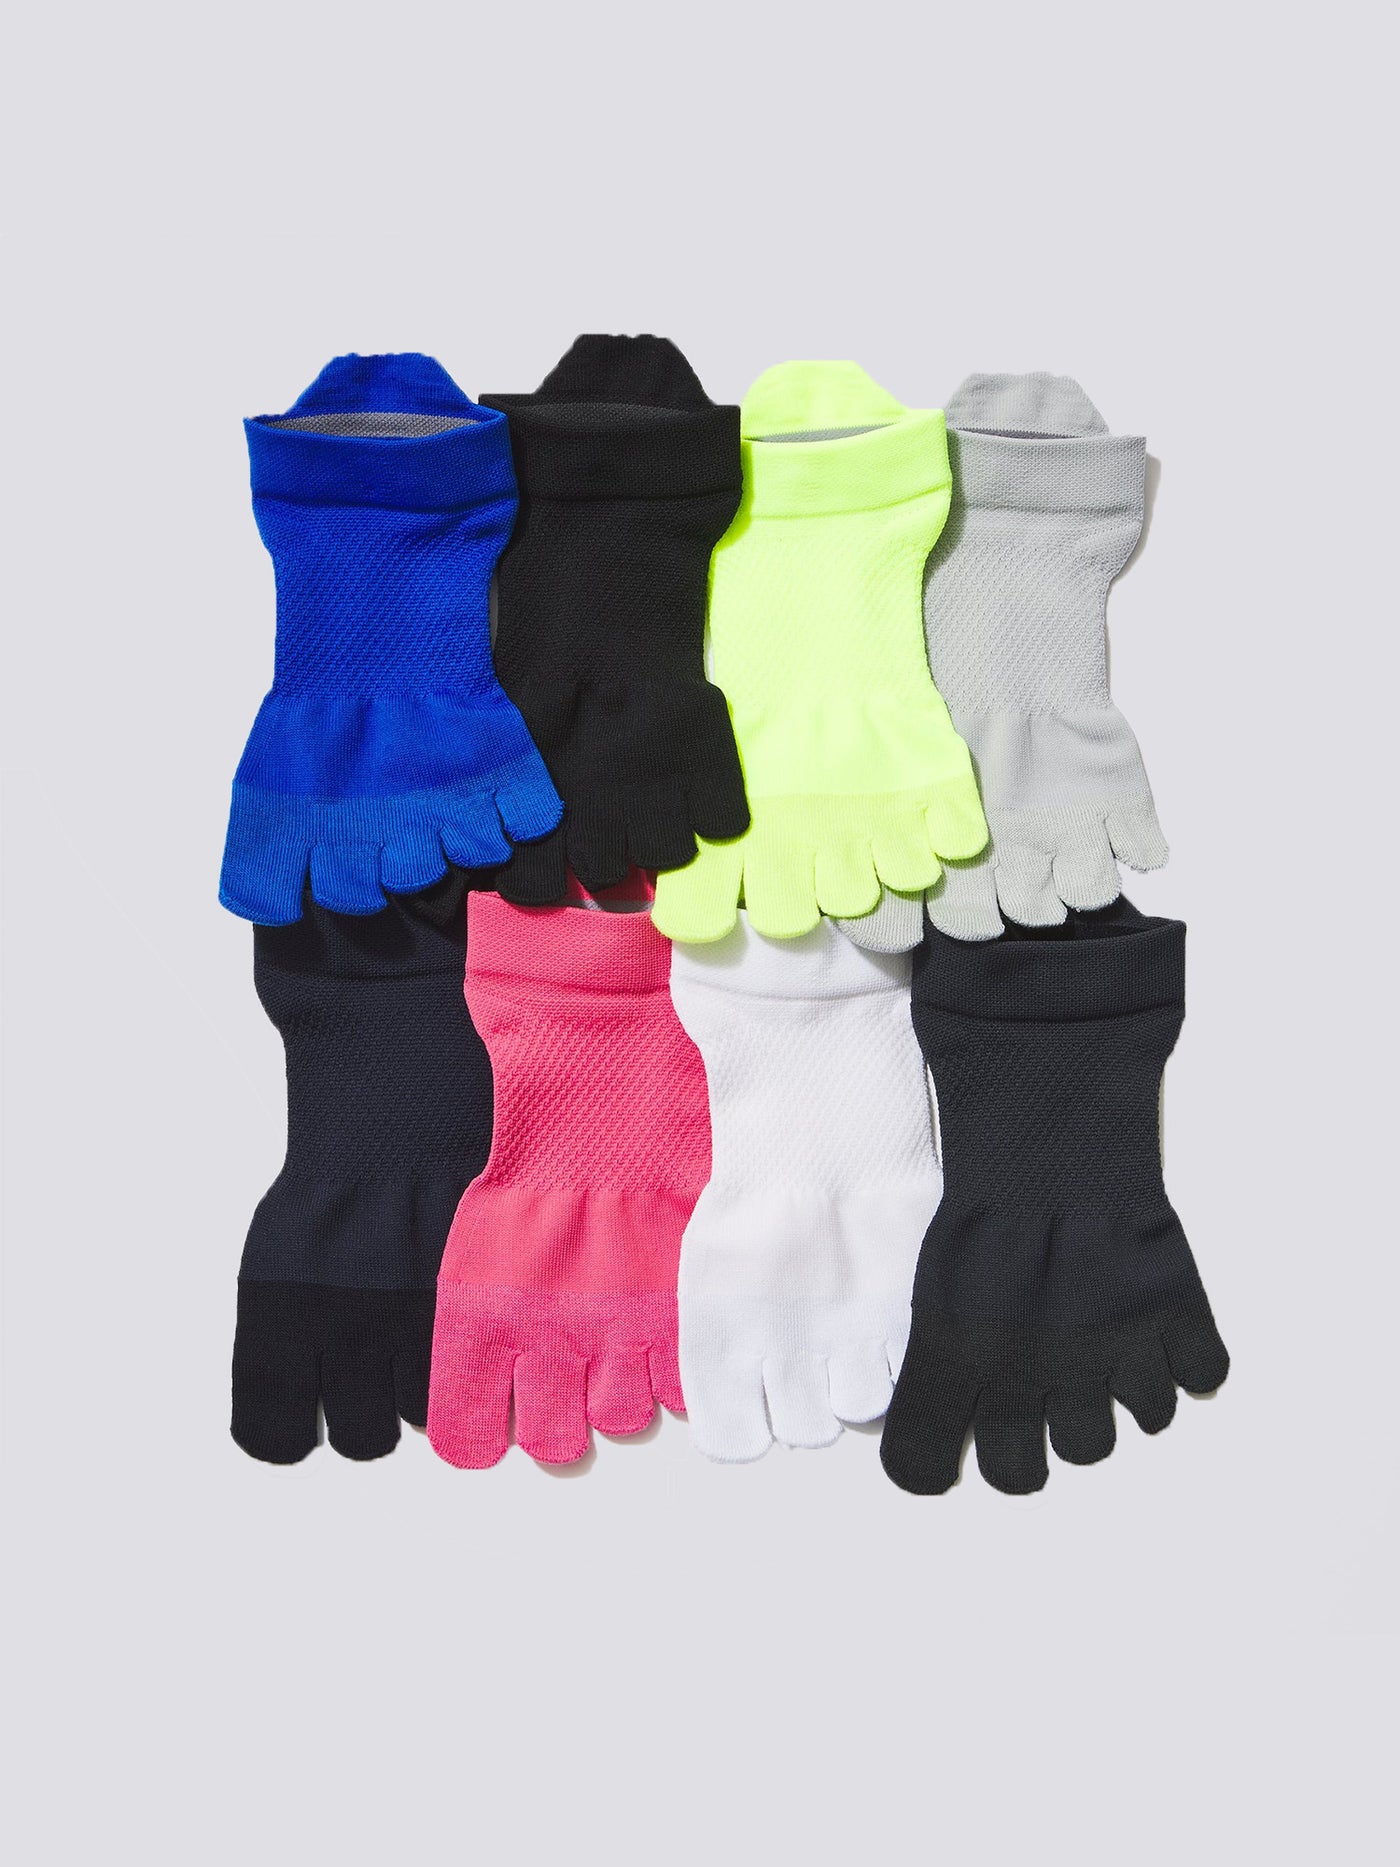 5-Toe C3fit Arch Support Short Socks